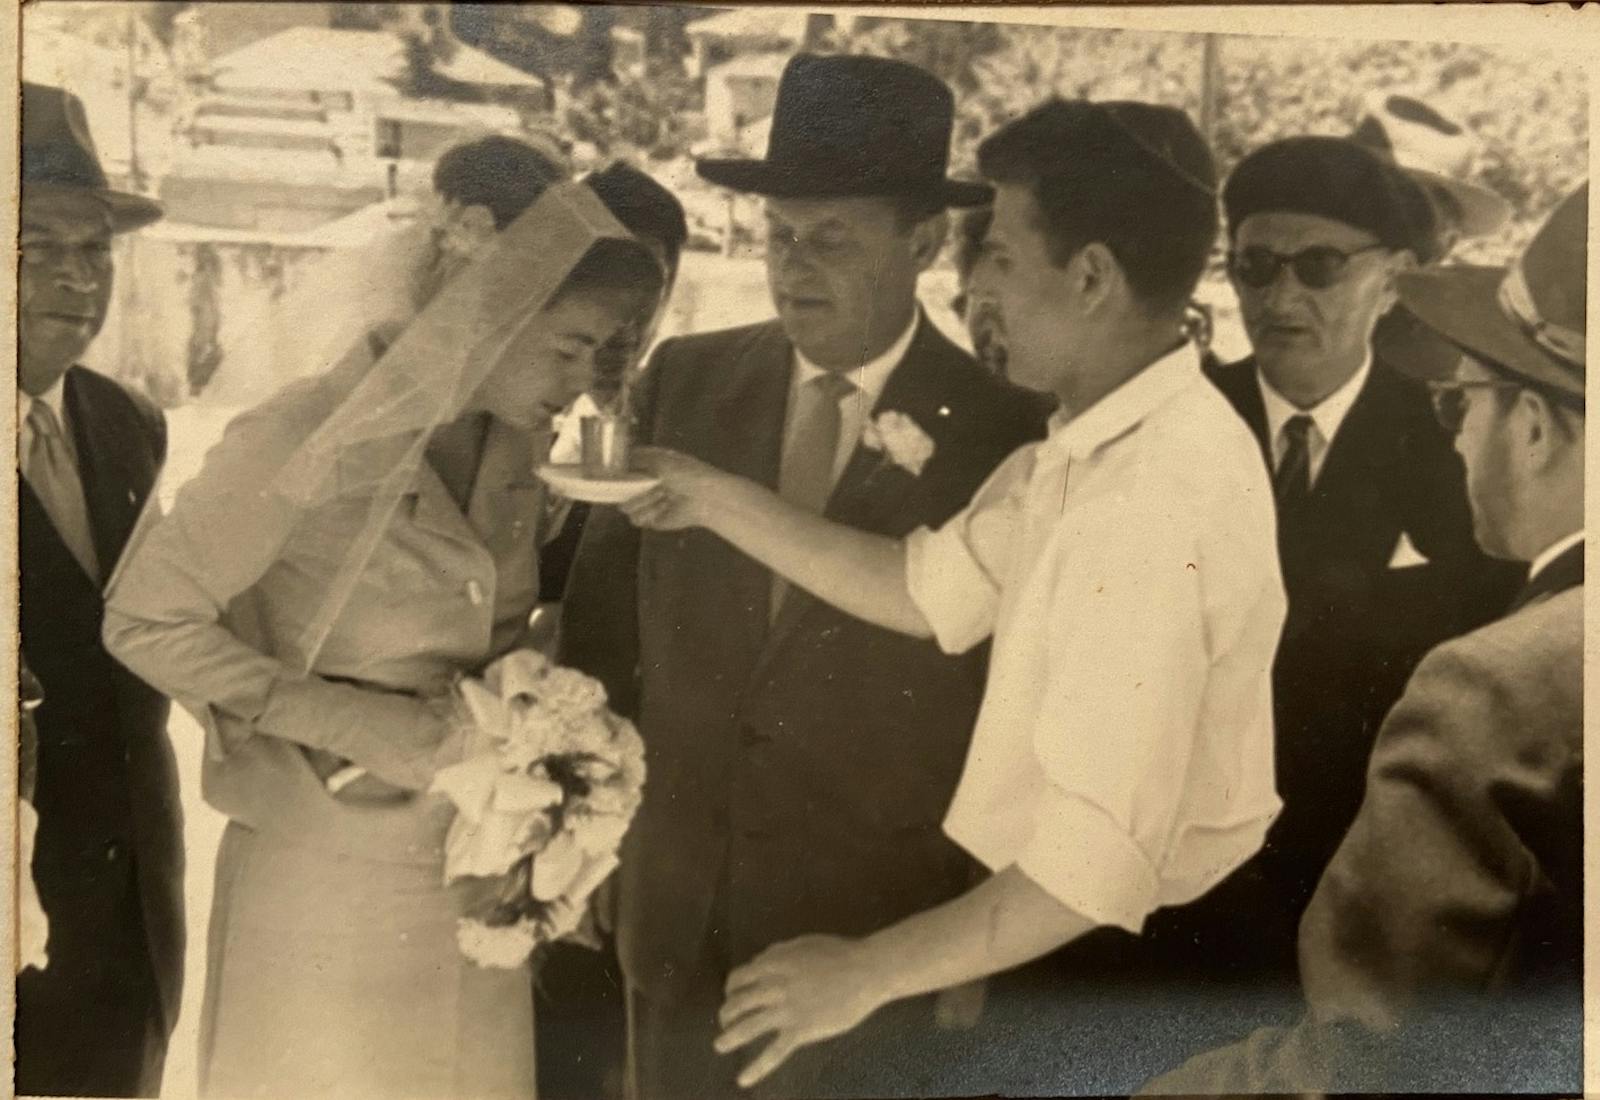 Vivian's parents, Etienne and Isaac, at their wedding in Israel, 1959.